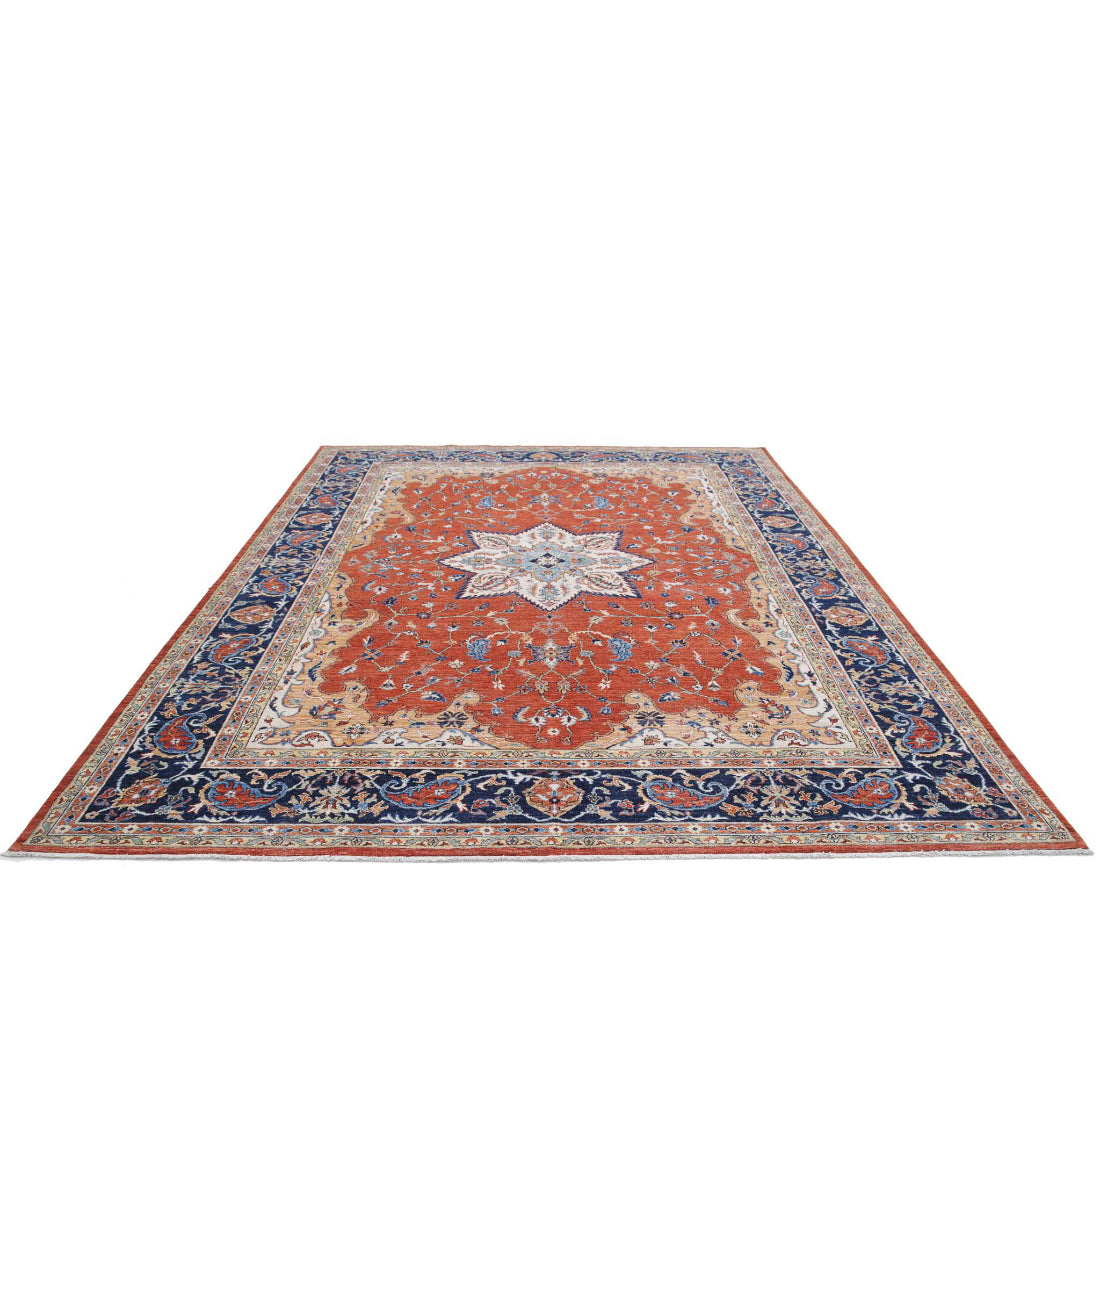 Hand Knotted Nomadic Caucasian Humna Wool Rug - 8'11'' x 11'8'' 8'11'' x 11'8'' (268 X 350) / Rust / Blue